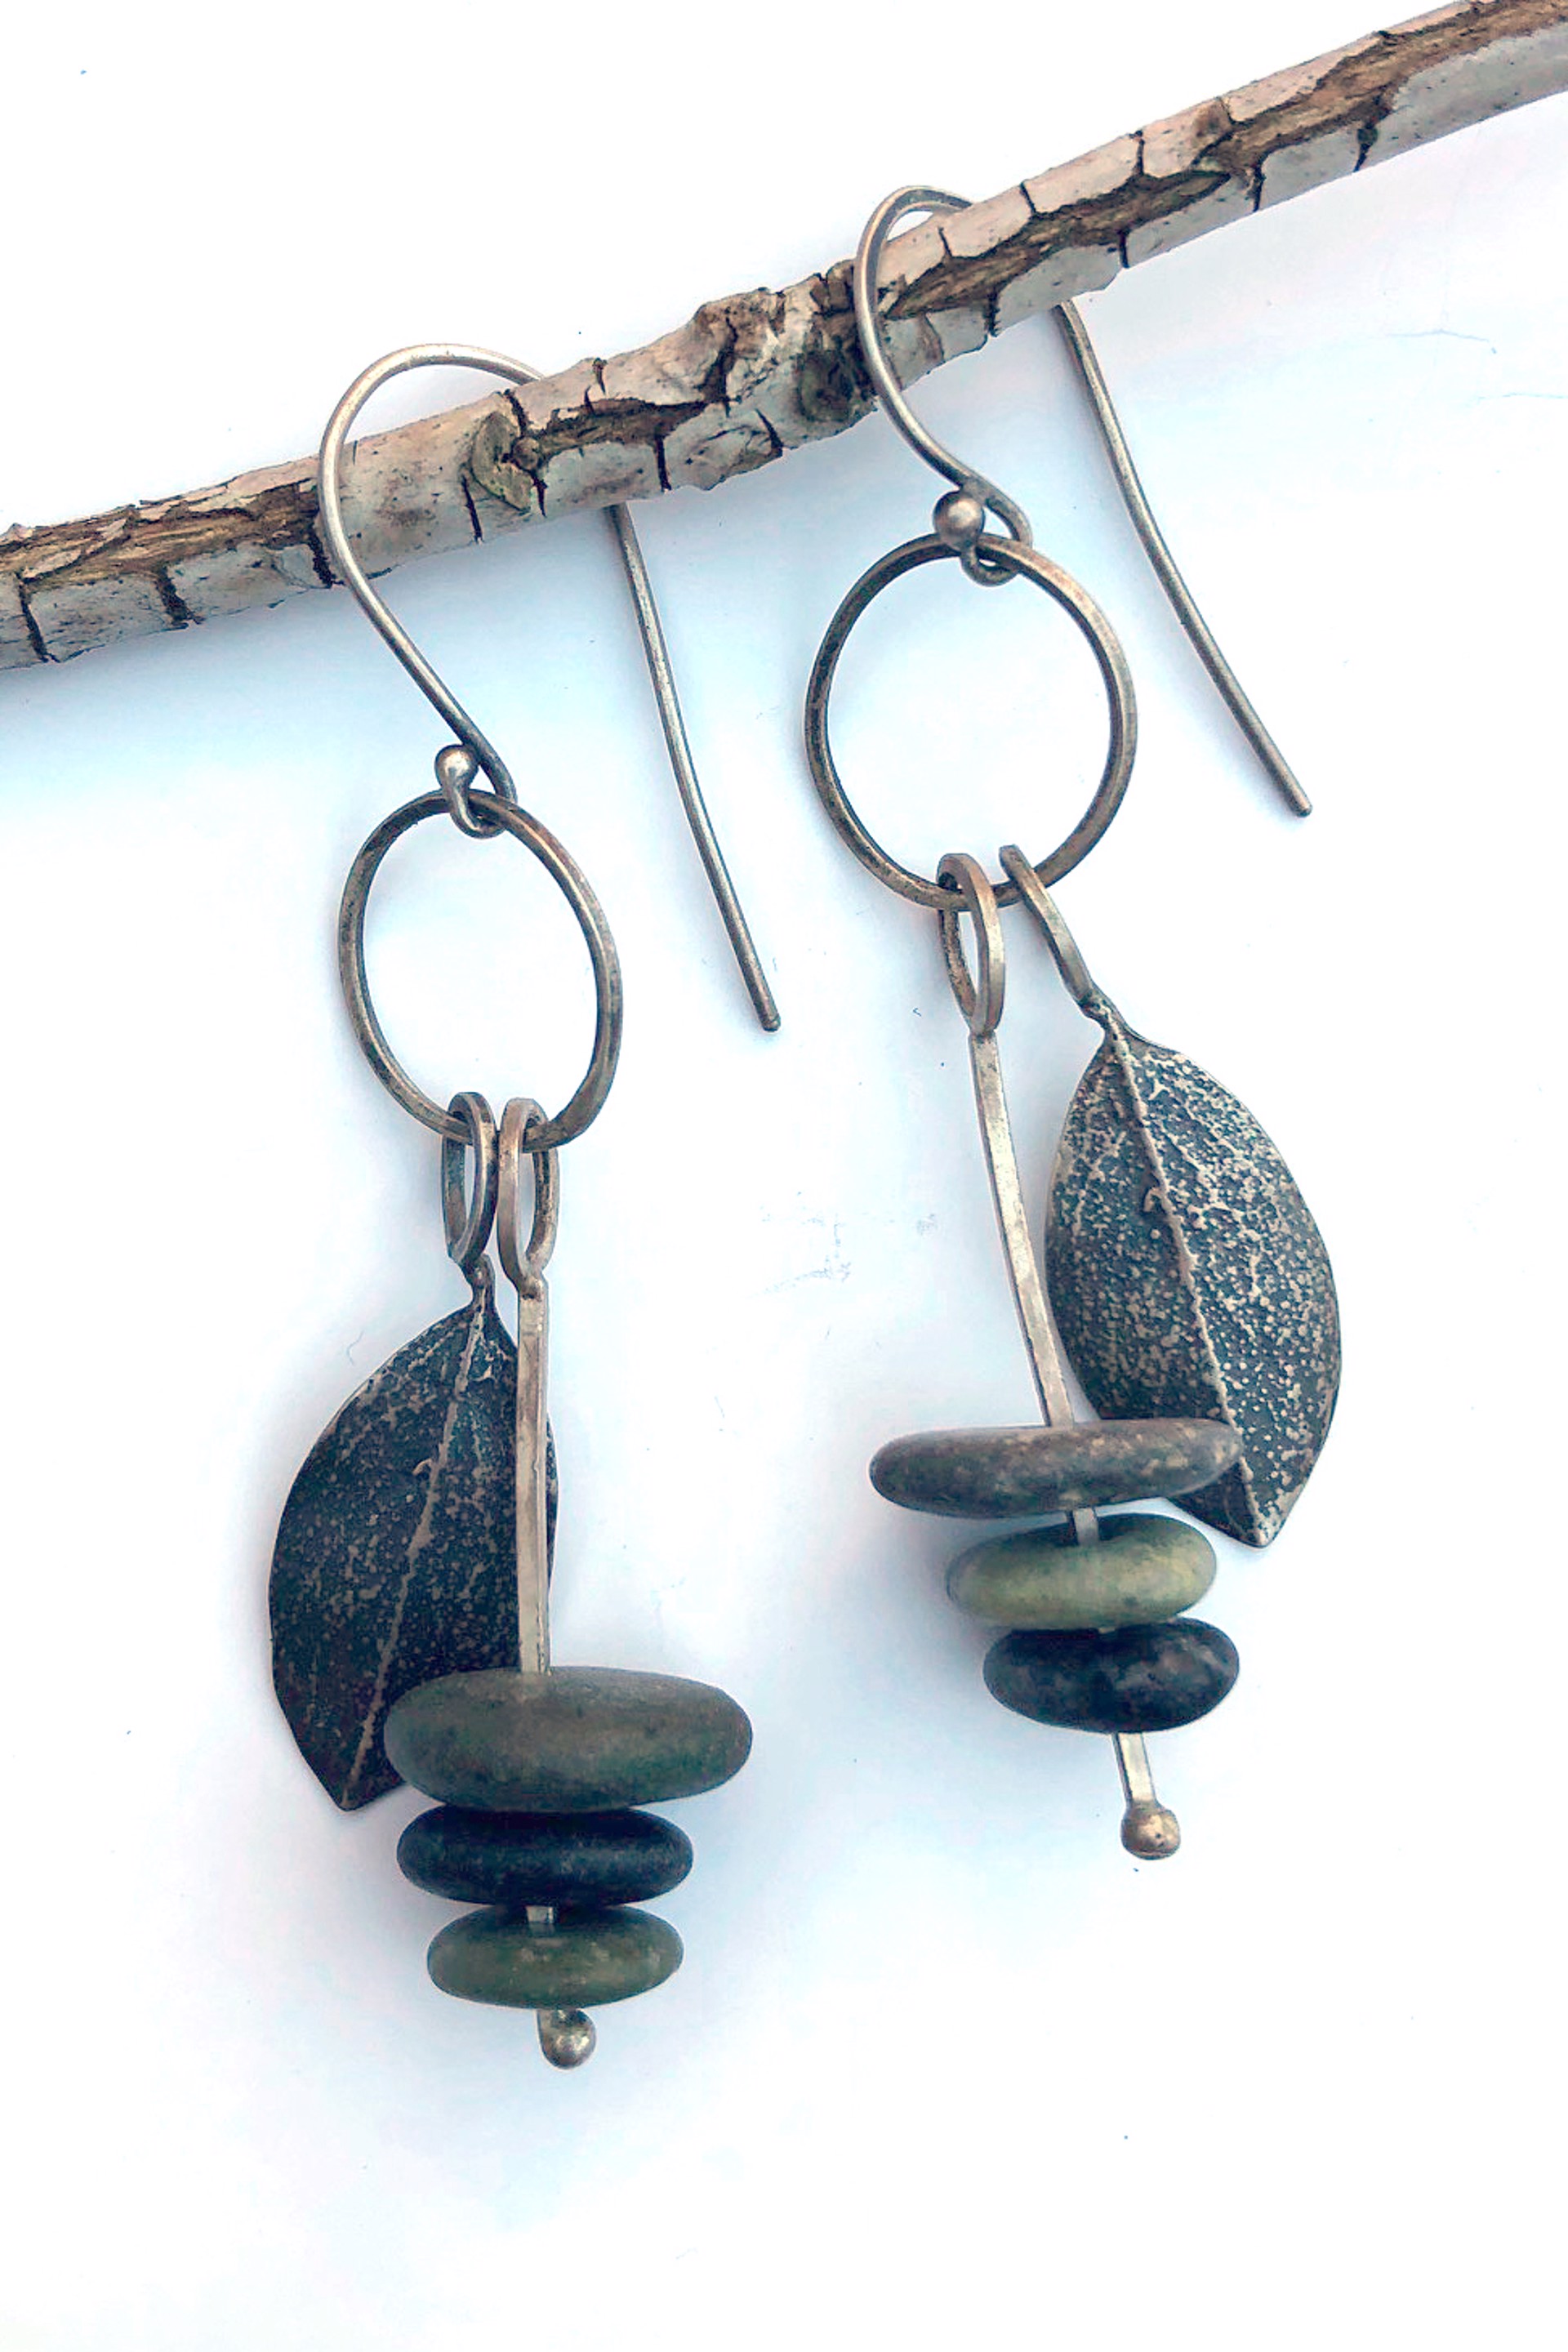 Three Stones w/ Leaves on Ring Earrings by April Ottey